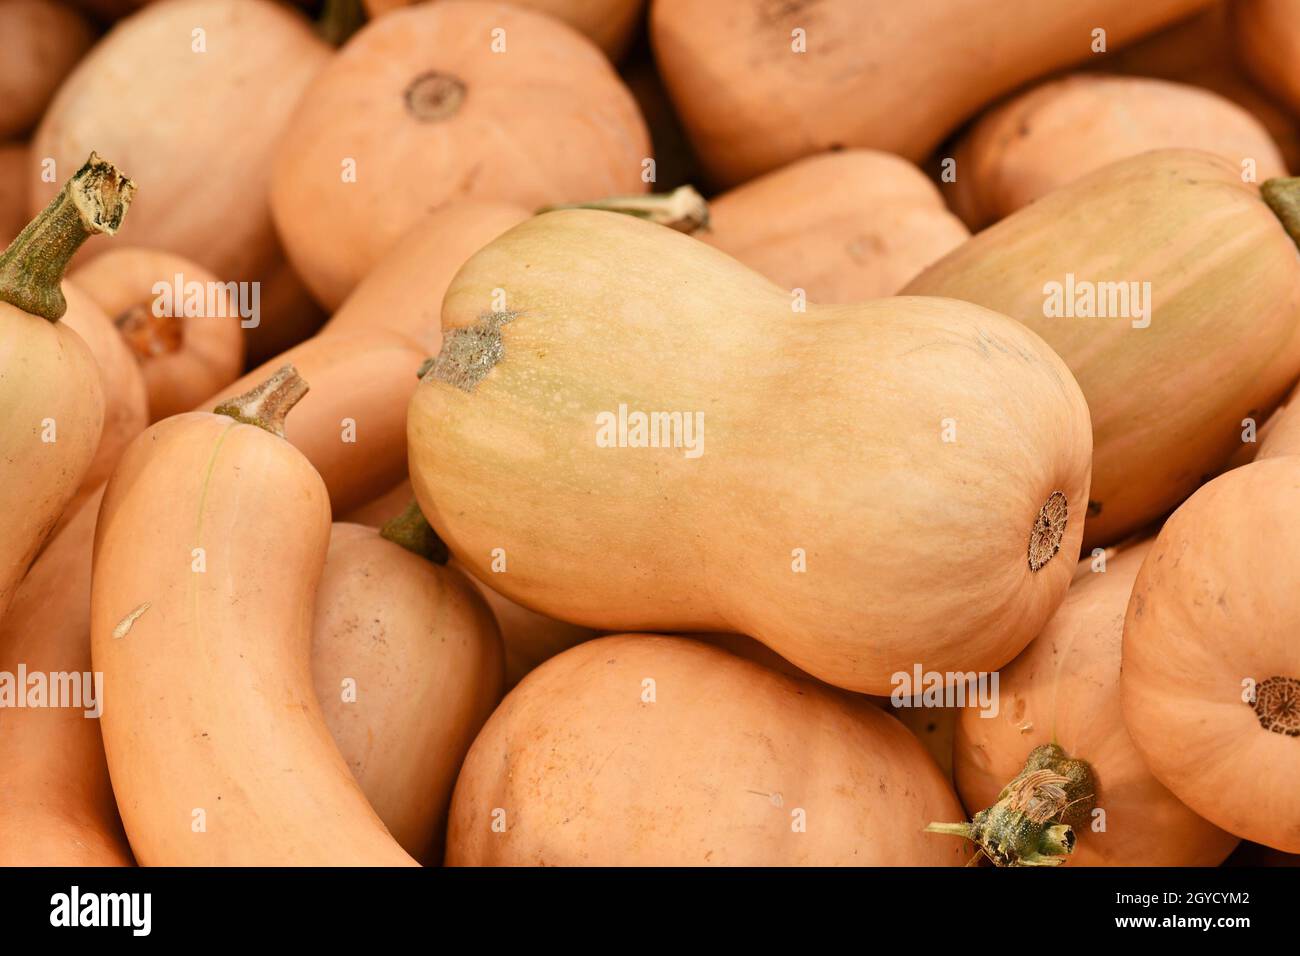 Butternut squash on pile of many raw pumpkins Stock Photo